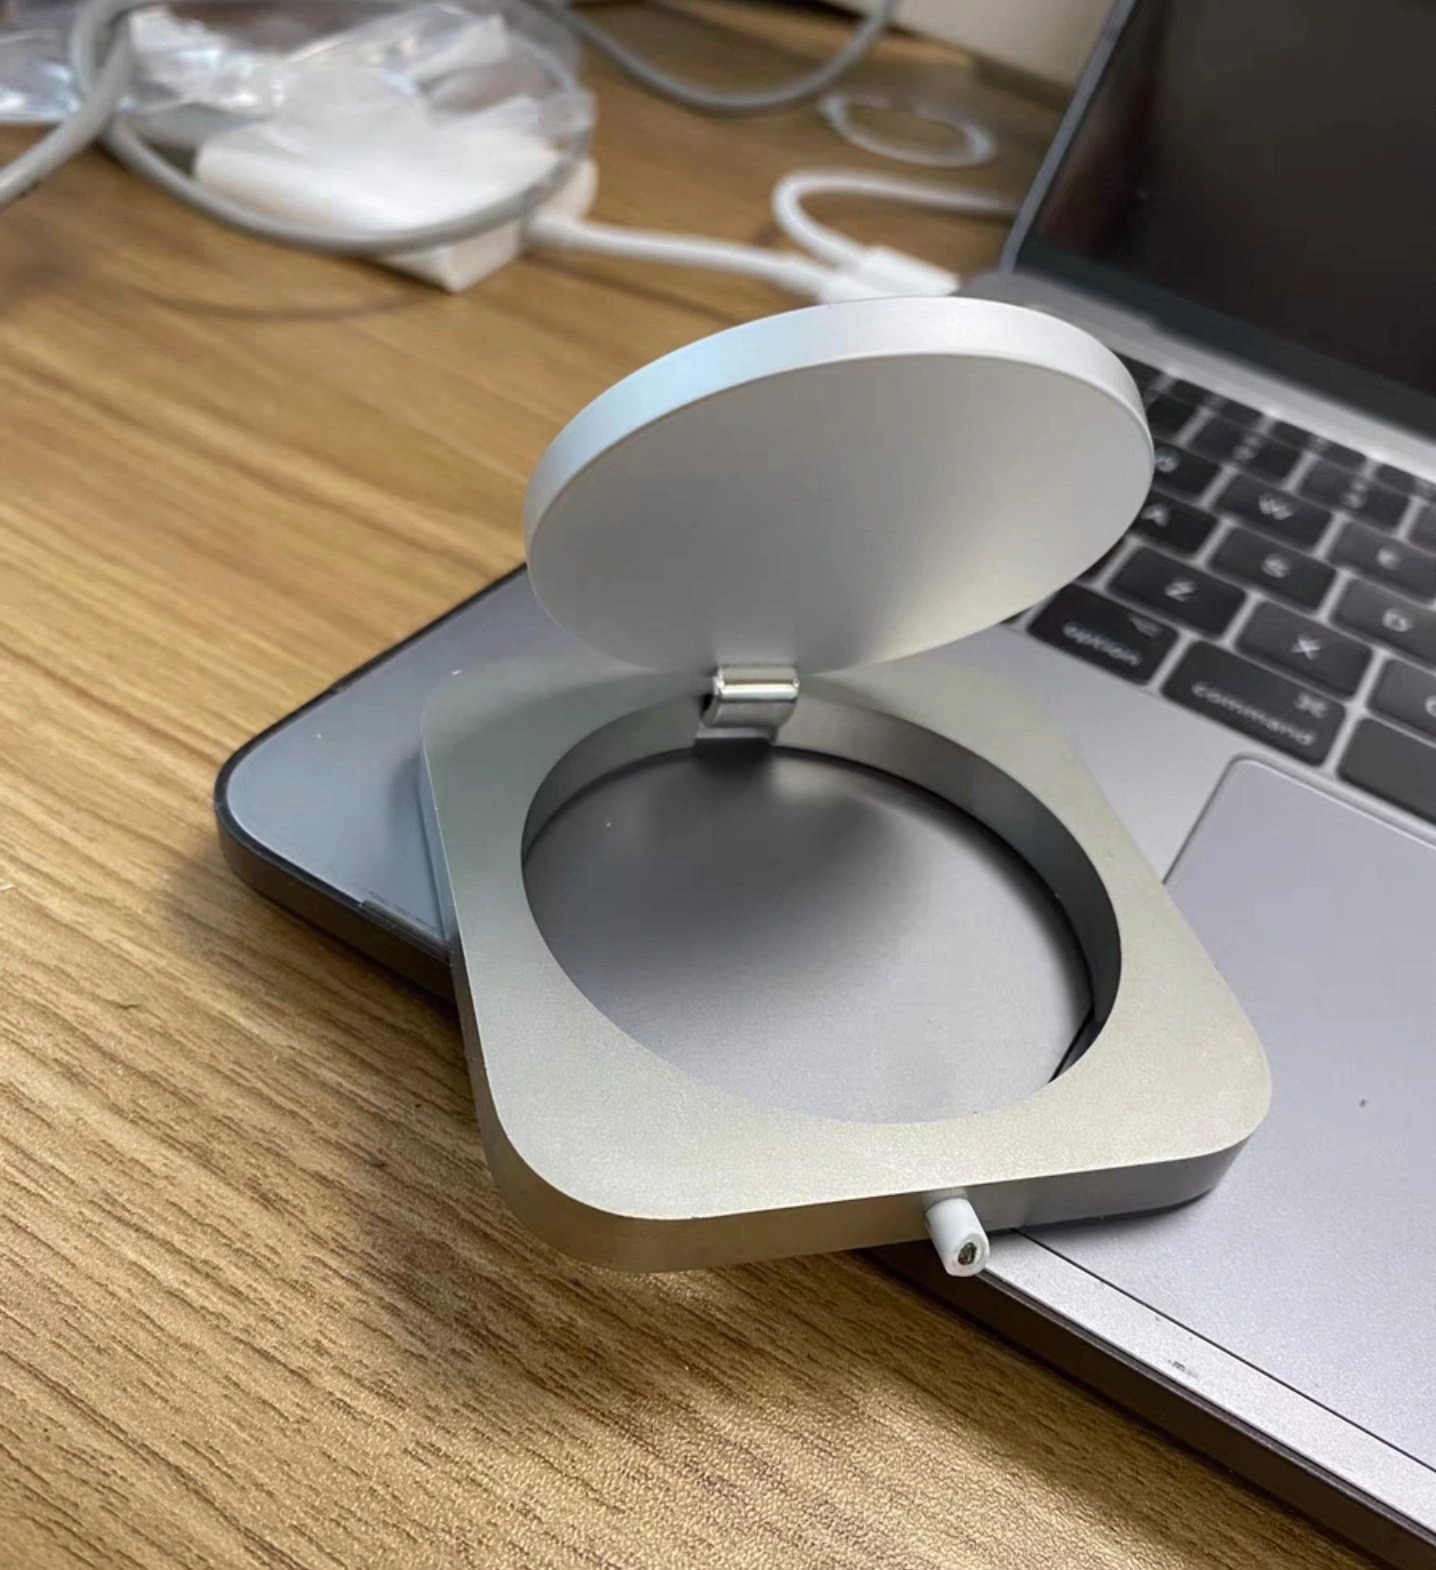 Apple's unannounced Apple Magic Charger leaked, may have been abandoned